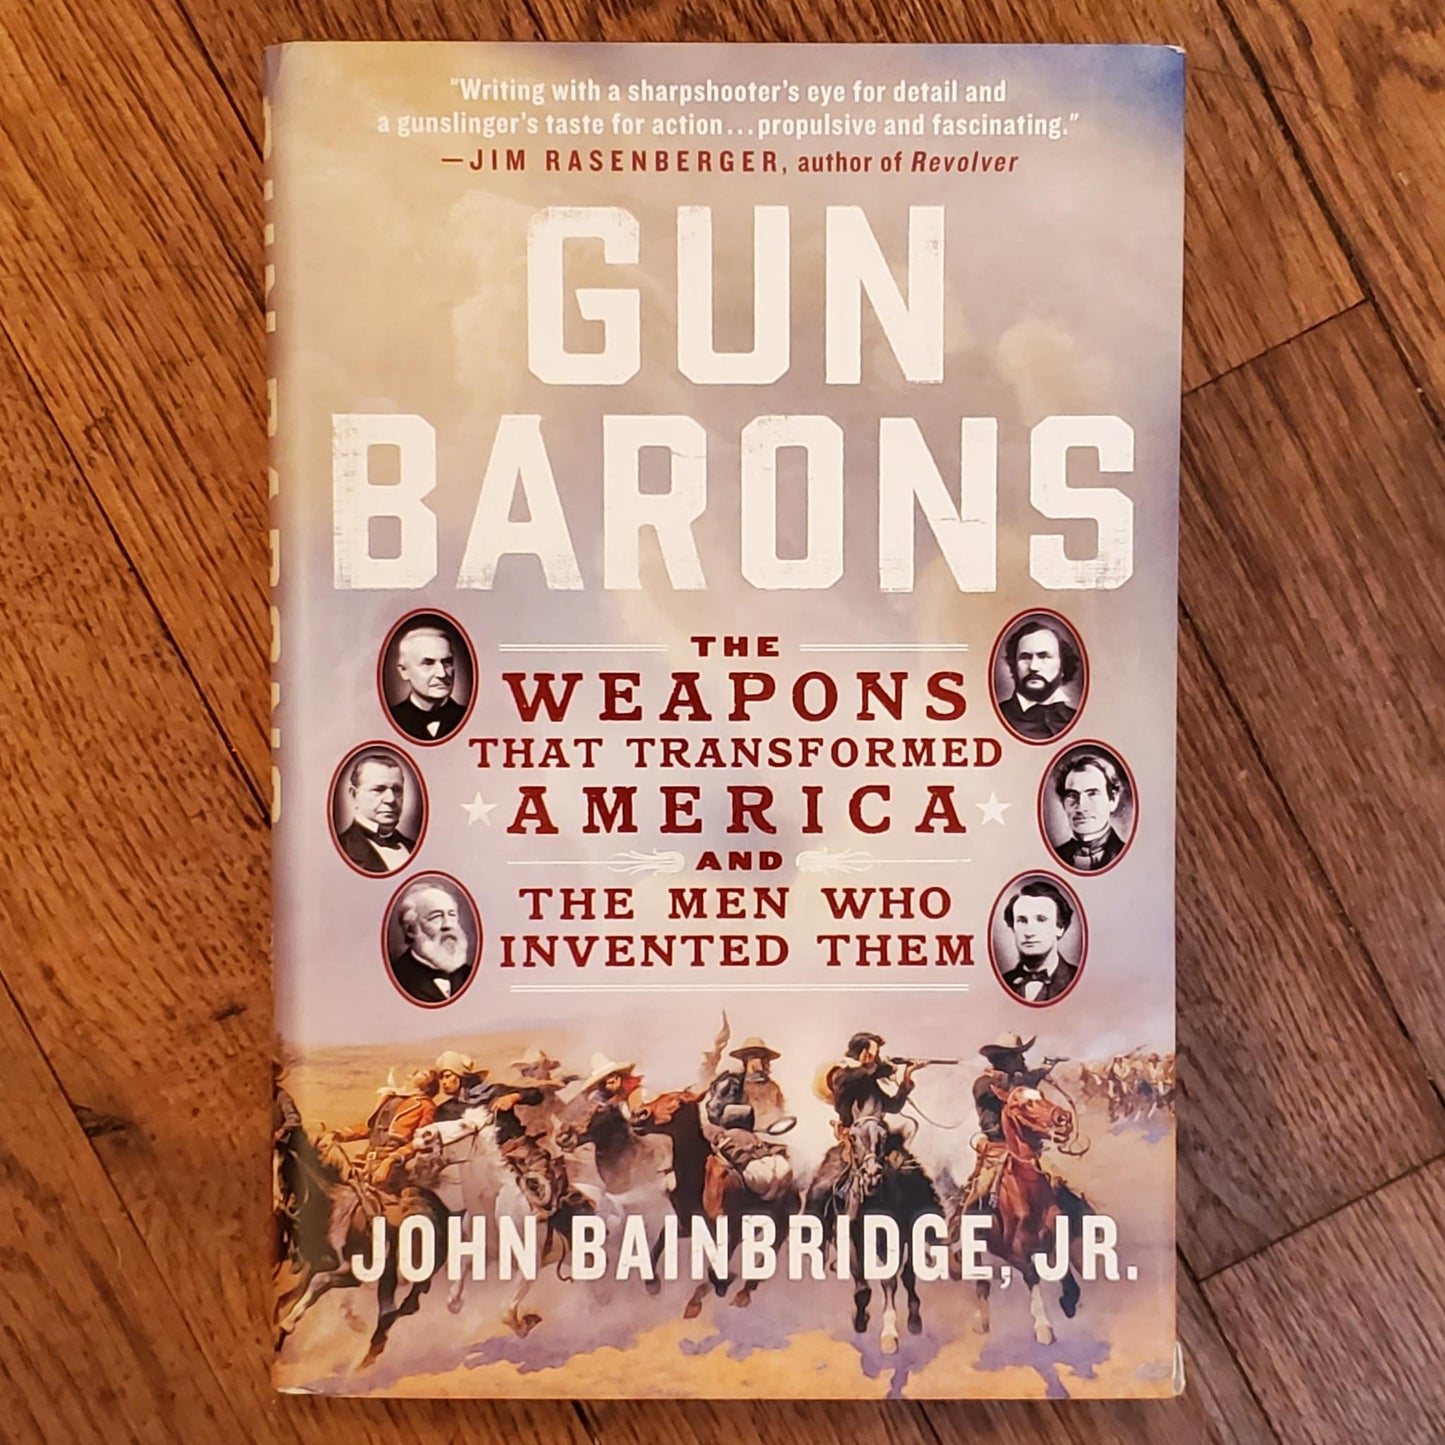 GB Gun Barons: The Weapons That Transformed America and the Men Who Invented Them